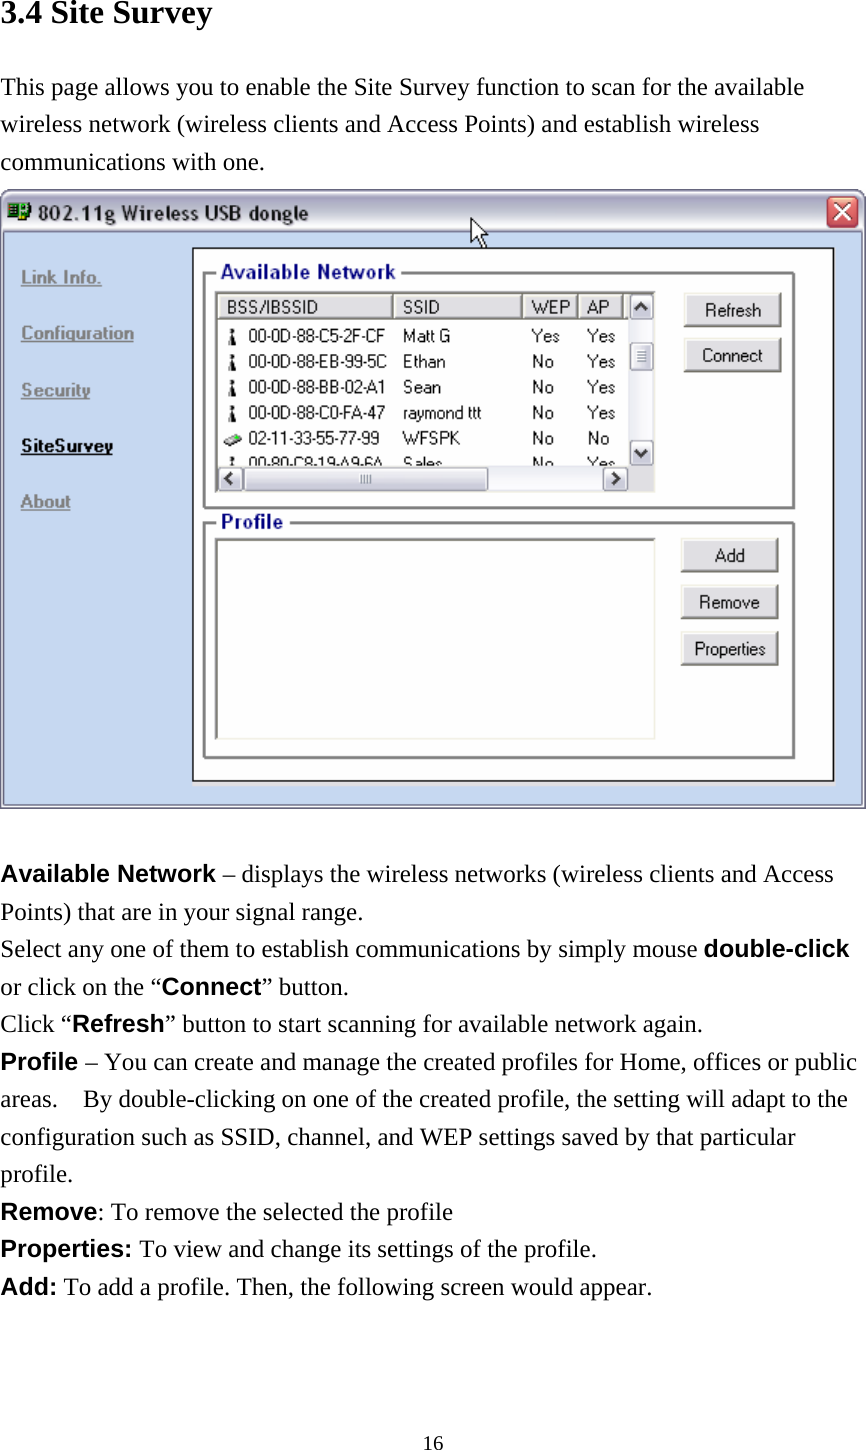  163.4 Site Survey This page allows you to enable the Site Survey function to scan for the available wireless network (wireless clients and Access Points) and establish wireless communications with one.   Available Network – displays the wireless networks (wireless clients and Access Points) that are in your signal range.   Select any one of them to establish communications by simply mouse double-click or click on the “Connect” button. Click “Refresh” button to start scanning for available network again. Profile – You can create and manage the created profiles for Home, offices or public areas.    By double-clicking on one of the created profile, the setting will adapt to the configuration such as SSID, channel, and WEP settings saved by that particular profile. Remove: To remove the selected the profile Properties: To view and change its settings of the profile. Add: To add a profile. Then, the following screen would appear. 